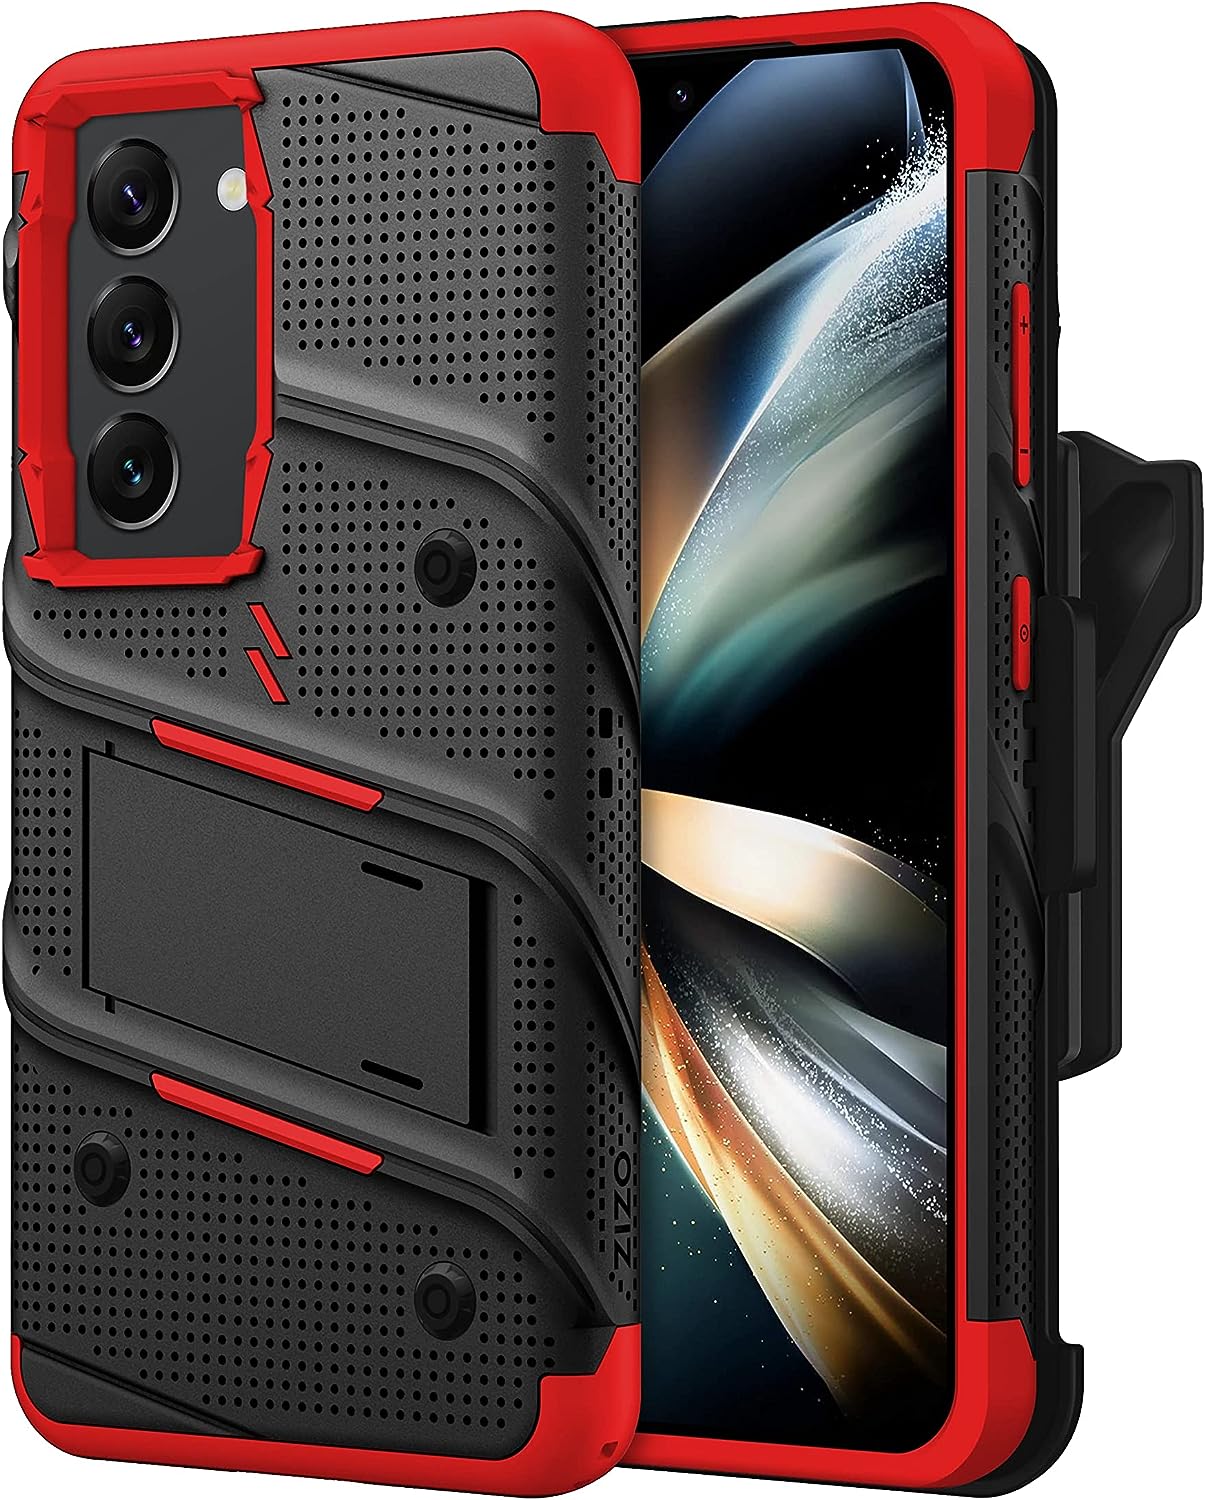 ZIZO Bolt Samsung Galaxy S23 5G Holster Case with Tempered Glass, Kickstand & Lanyard (3 Colors)